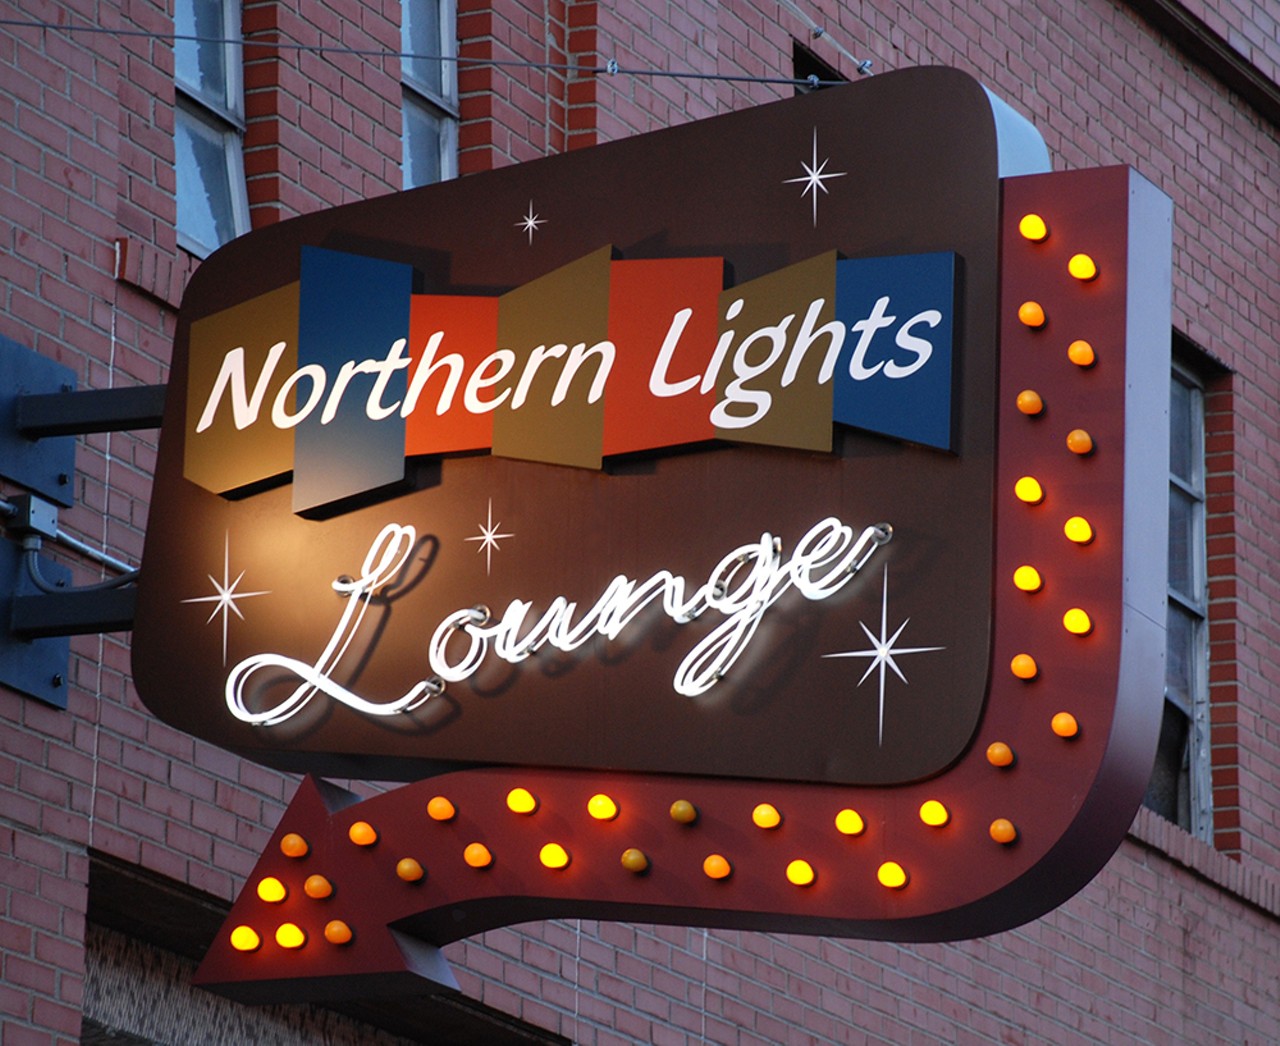 Northern Lights Lounge
660 W. Baltimore St., Detroit
On a less gross note, bathrooms can sometimes be great places to meet new people — such as the spacious women’s room at Northern Lights Lounge. “The friendships I’ve made and conversations I’ve had in that living room of a chill spot,​​” @0k.yams said on Instagram. Among others, one Redditor agreed, stating: “I’ll go directly to Northern Lights if I have to poop.”